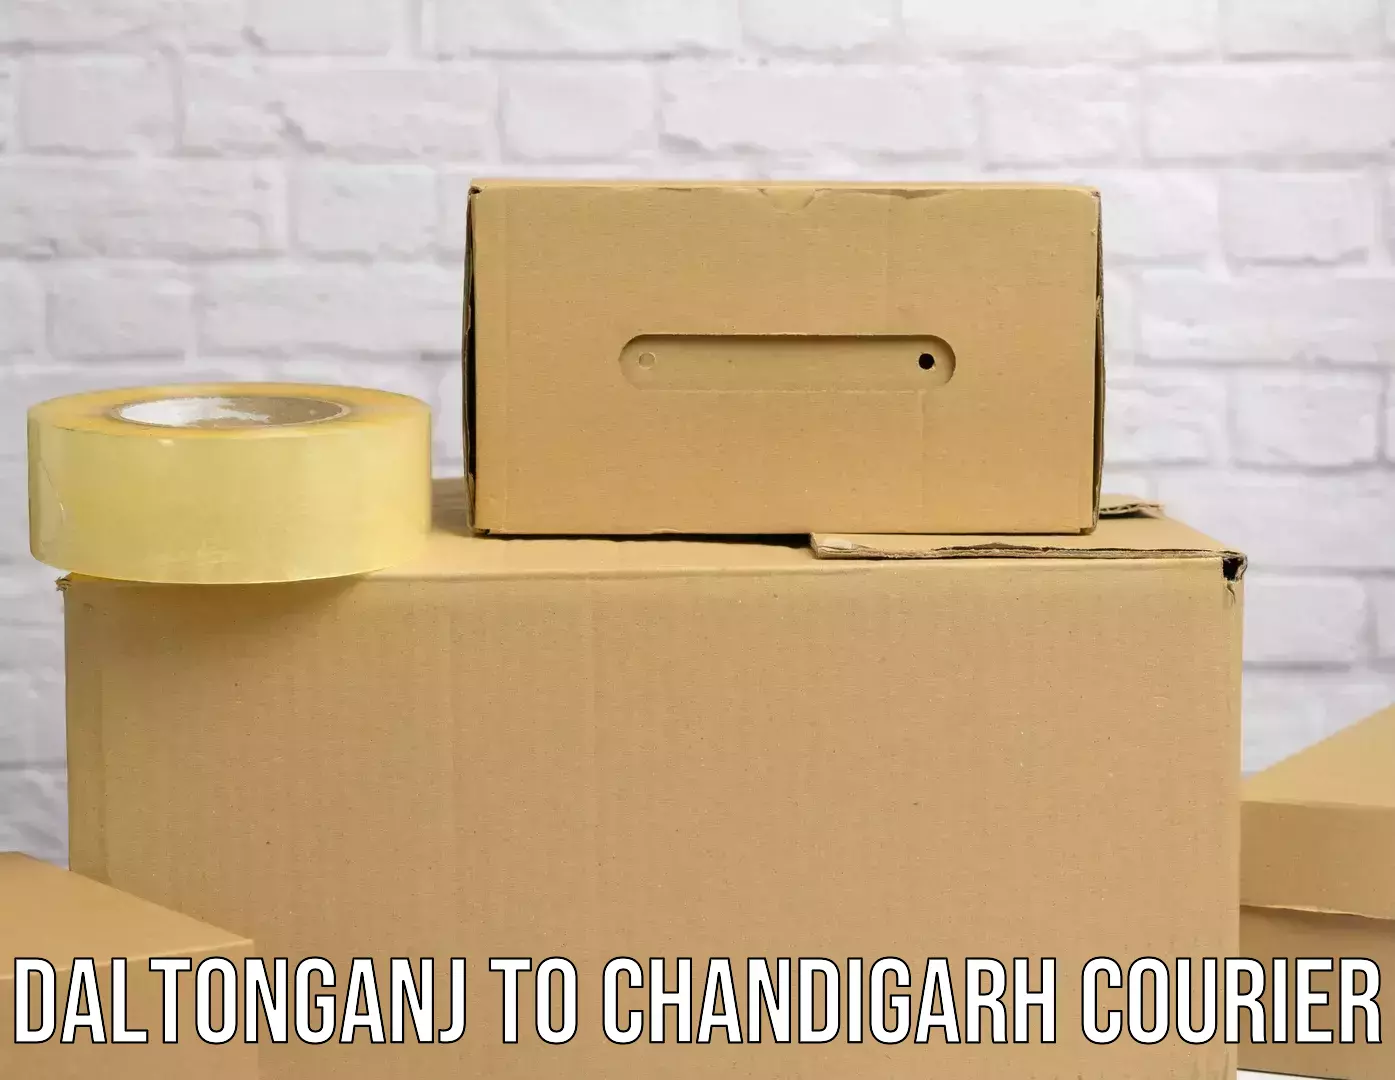 Full-service courier options in Daltonganj to Chandigarh